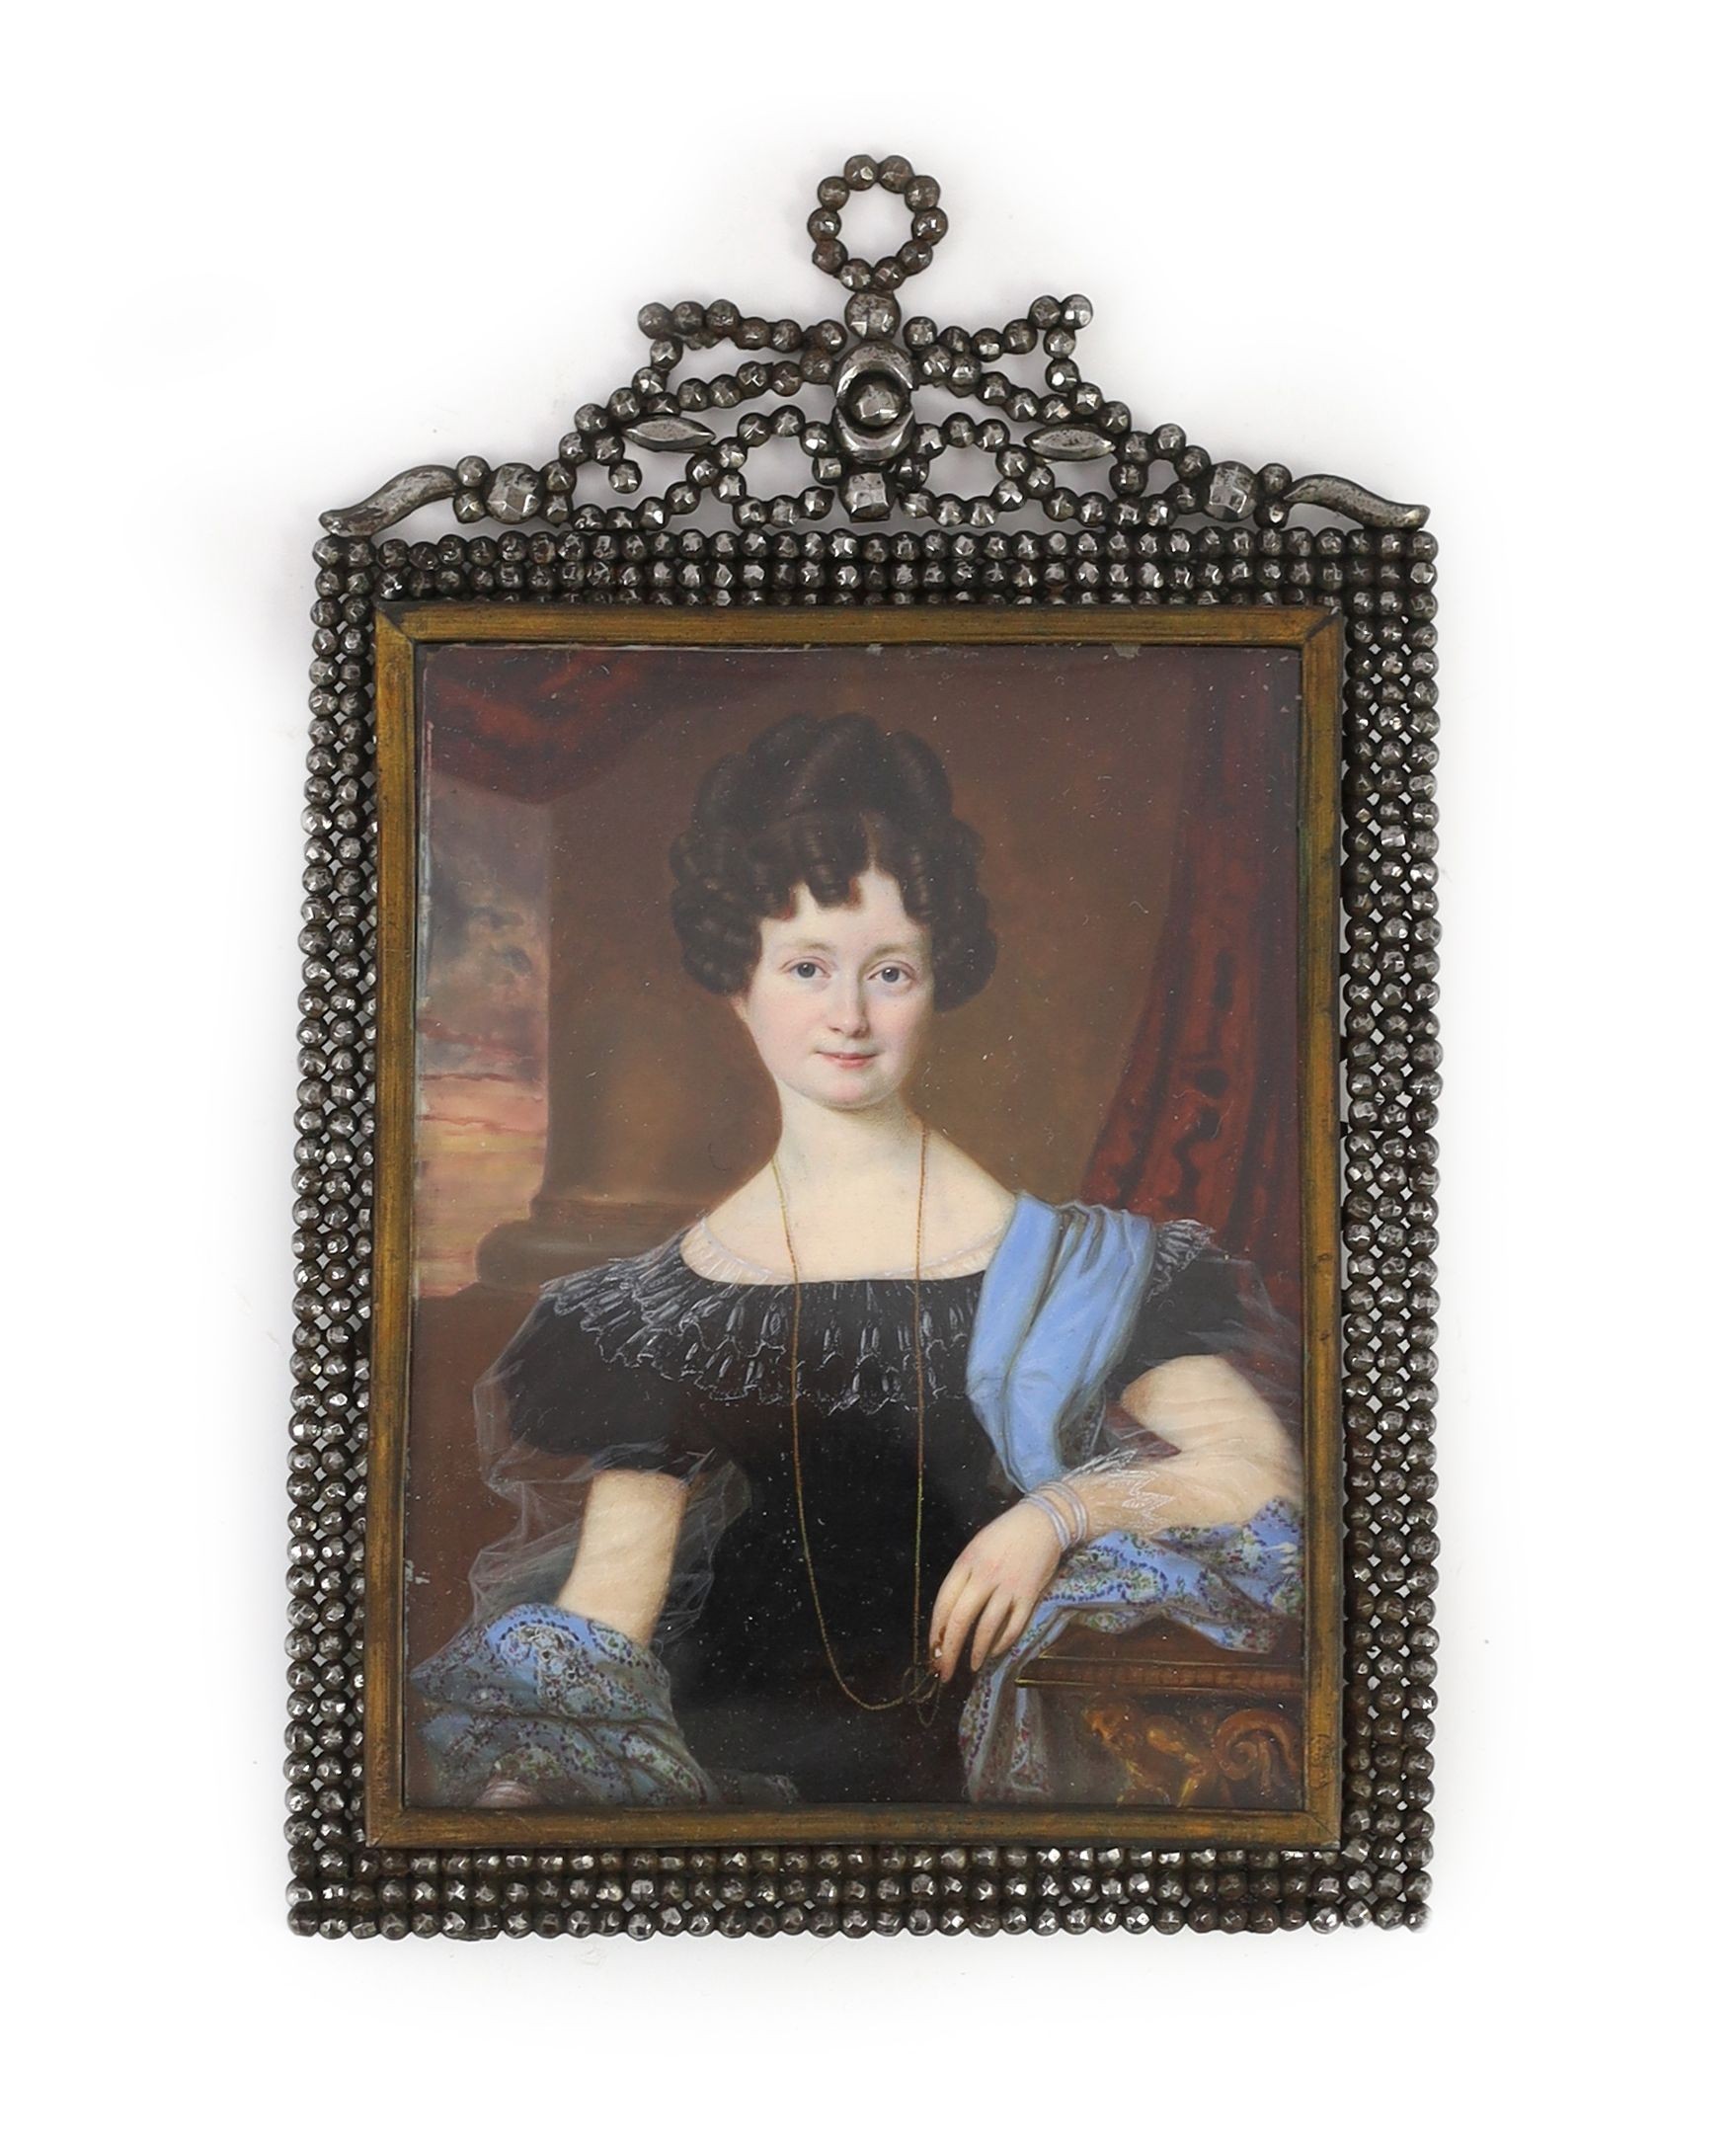 Lorenzo Thewenetti (Anglo-Italian, 1800-1878), Miniature portrait of a young lady, oil on ivory, 10.5 x 8cm. Cut steel frame.